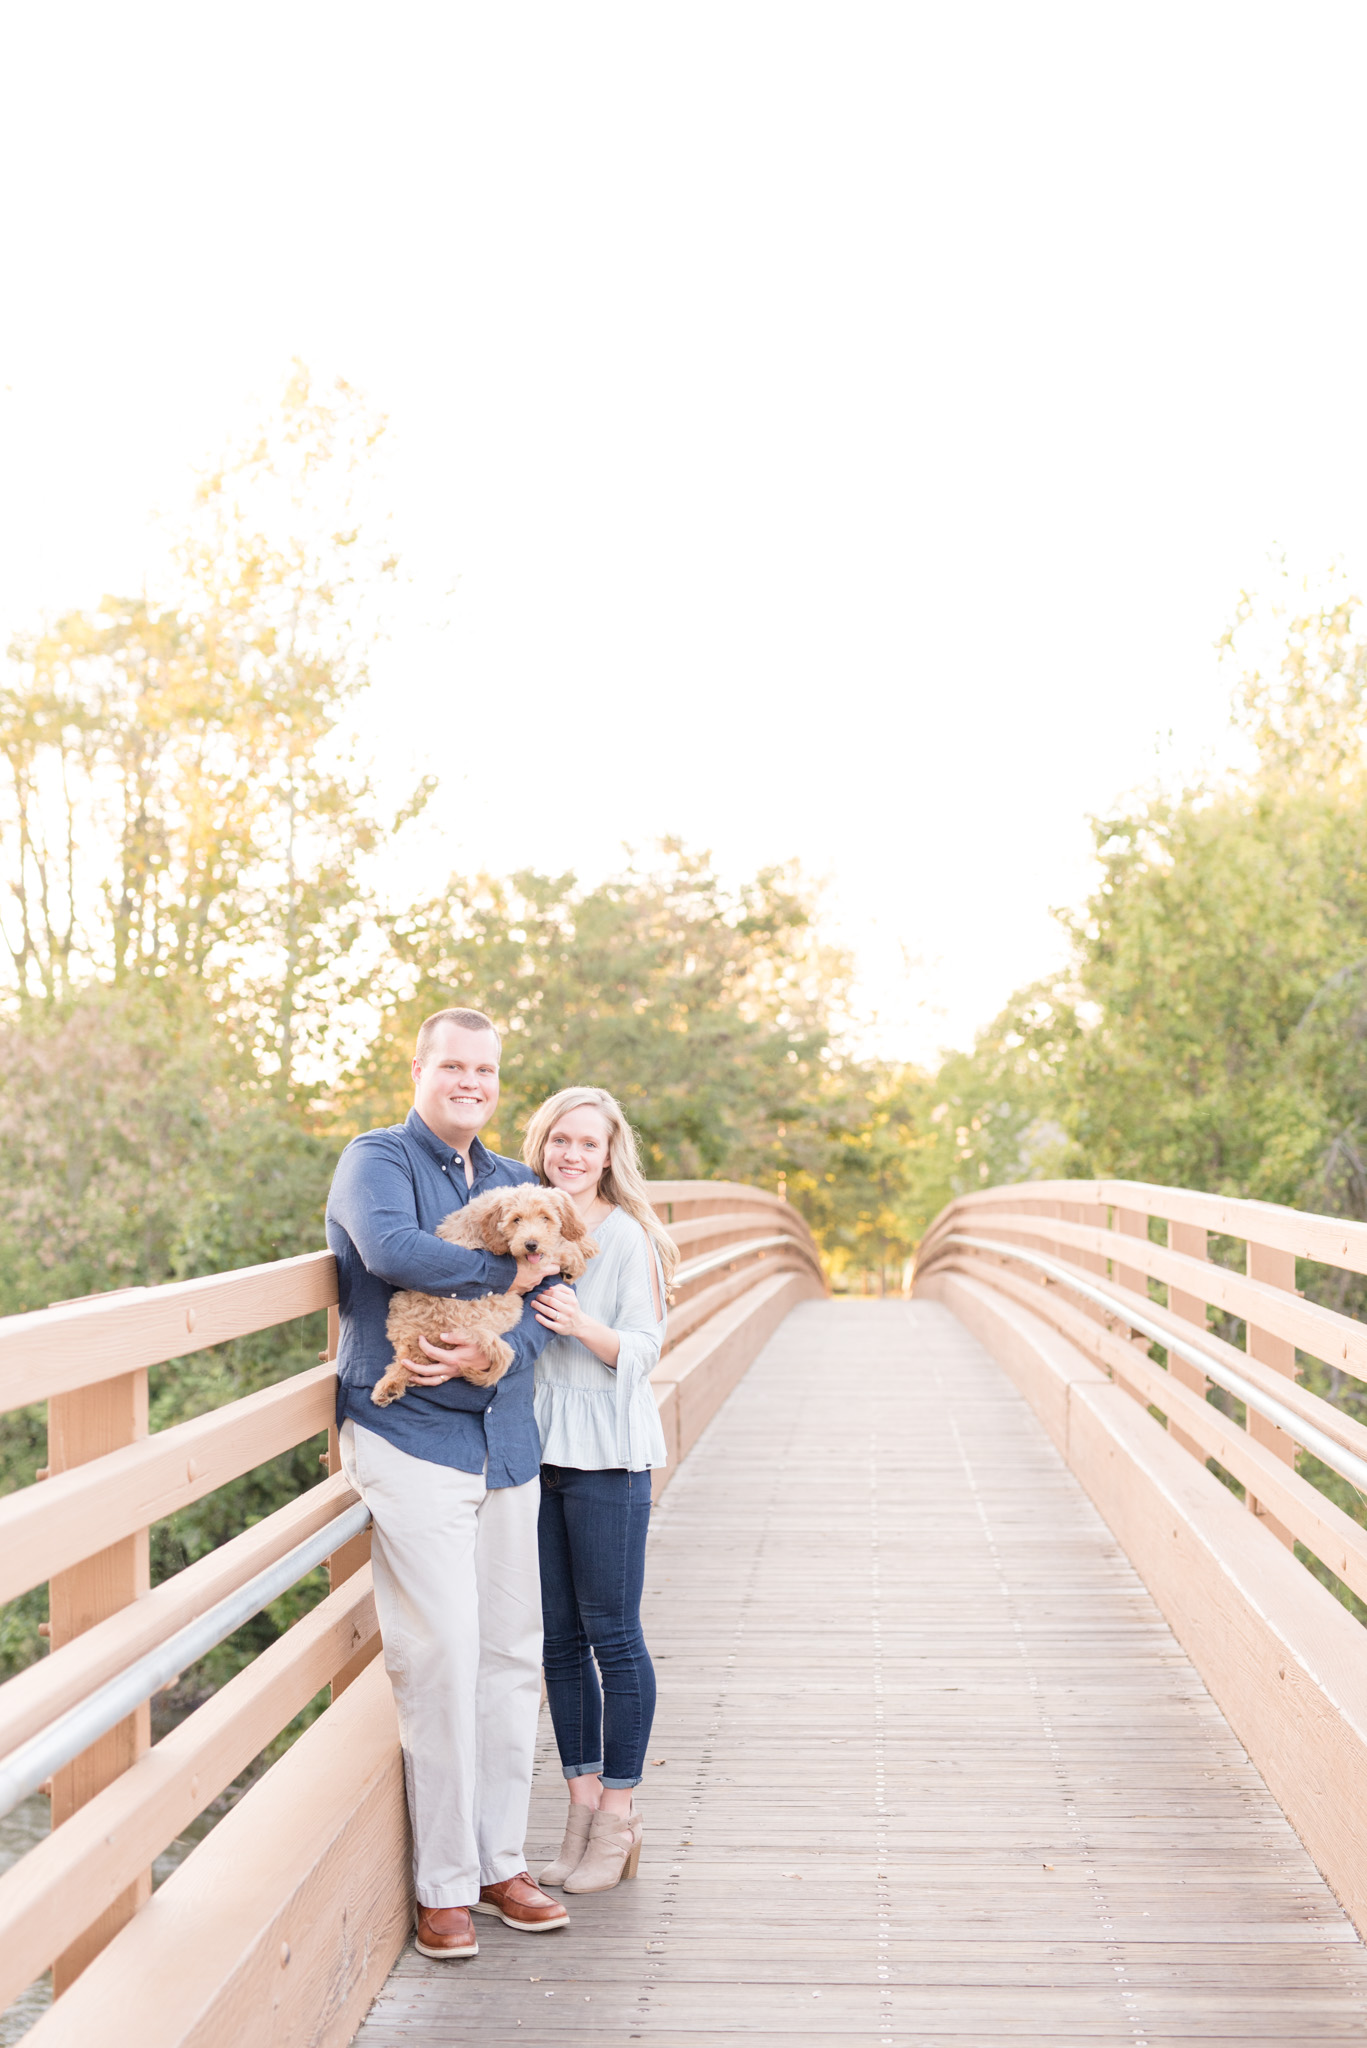 Couple smiles at camera while holding puppy on bridge.